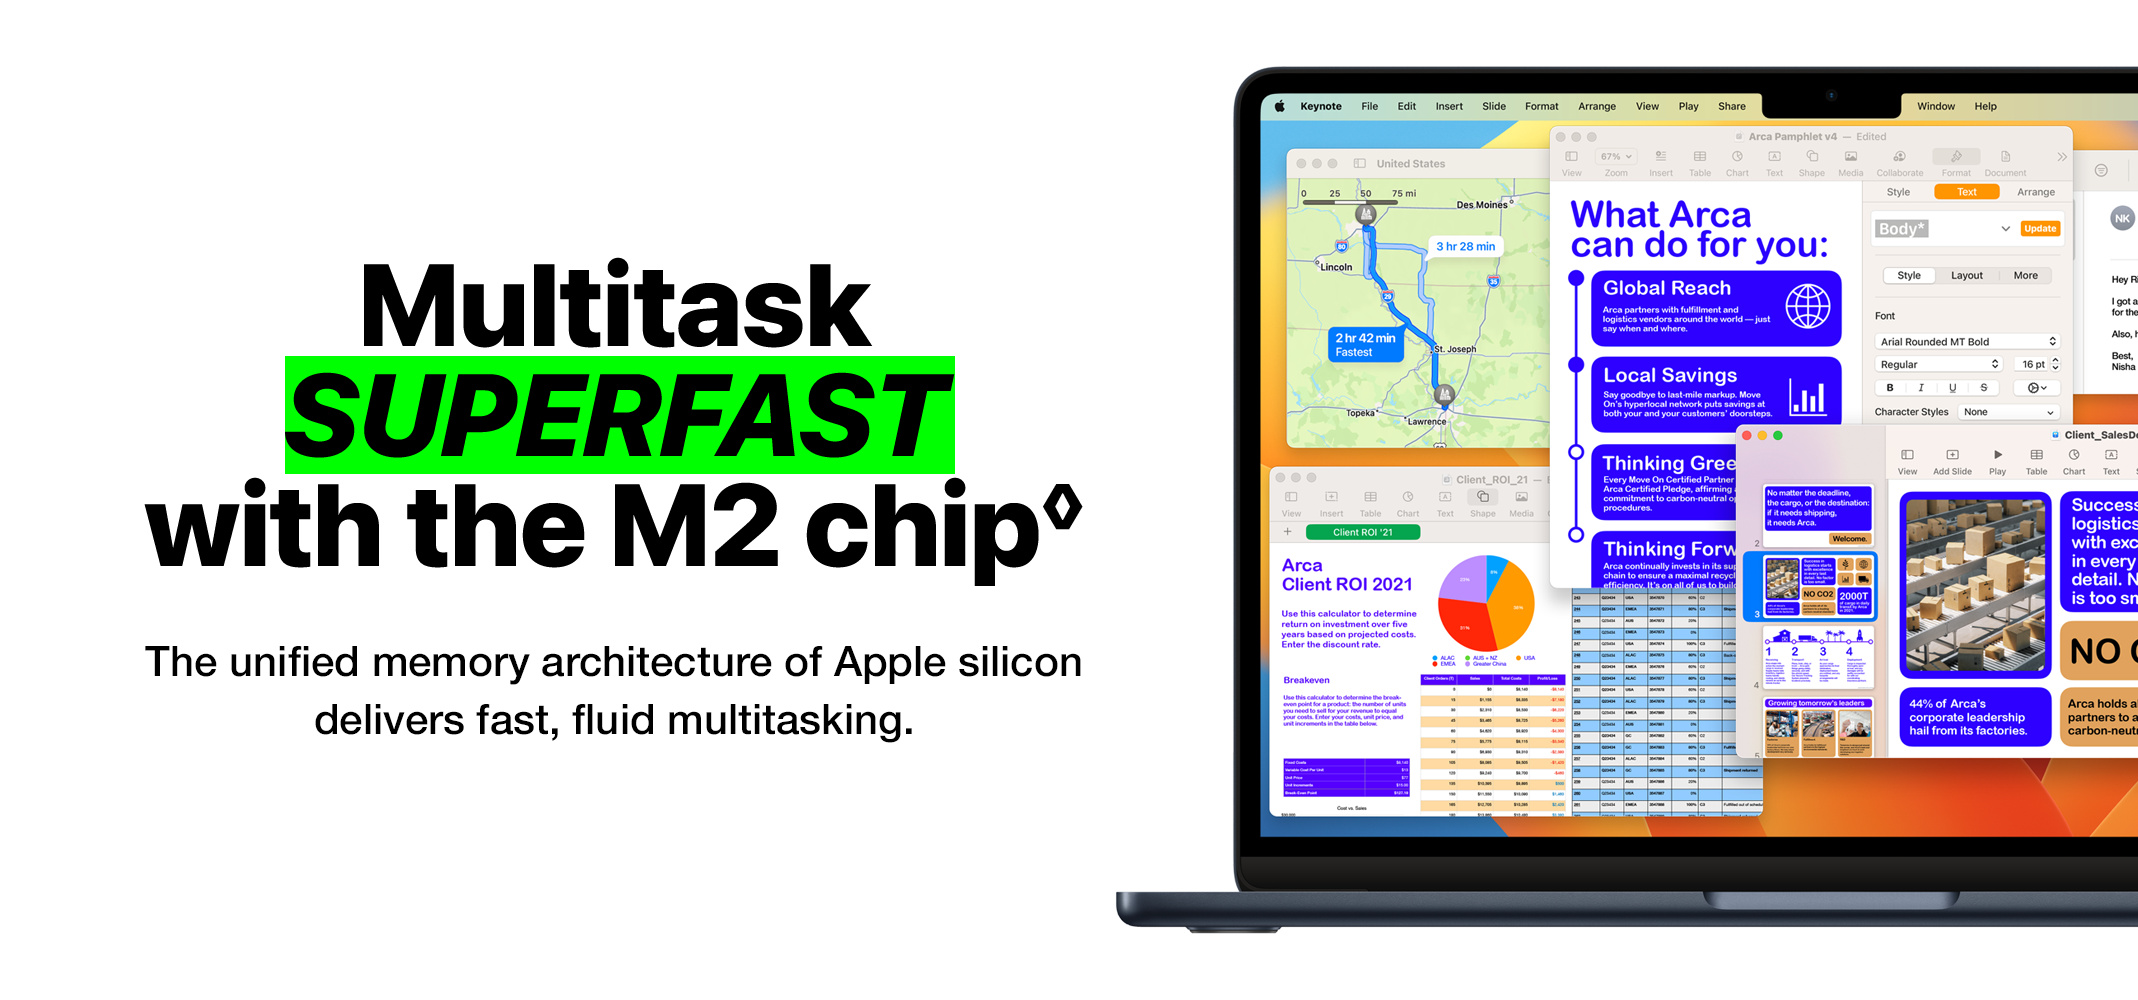 Multitask SUPERFAST with the M2 chip